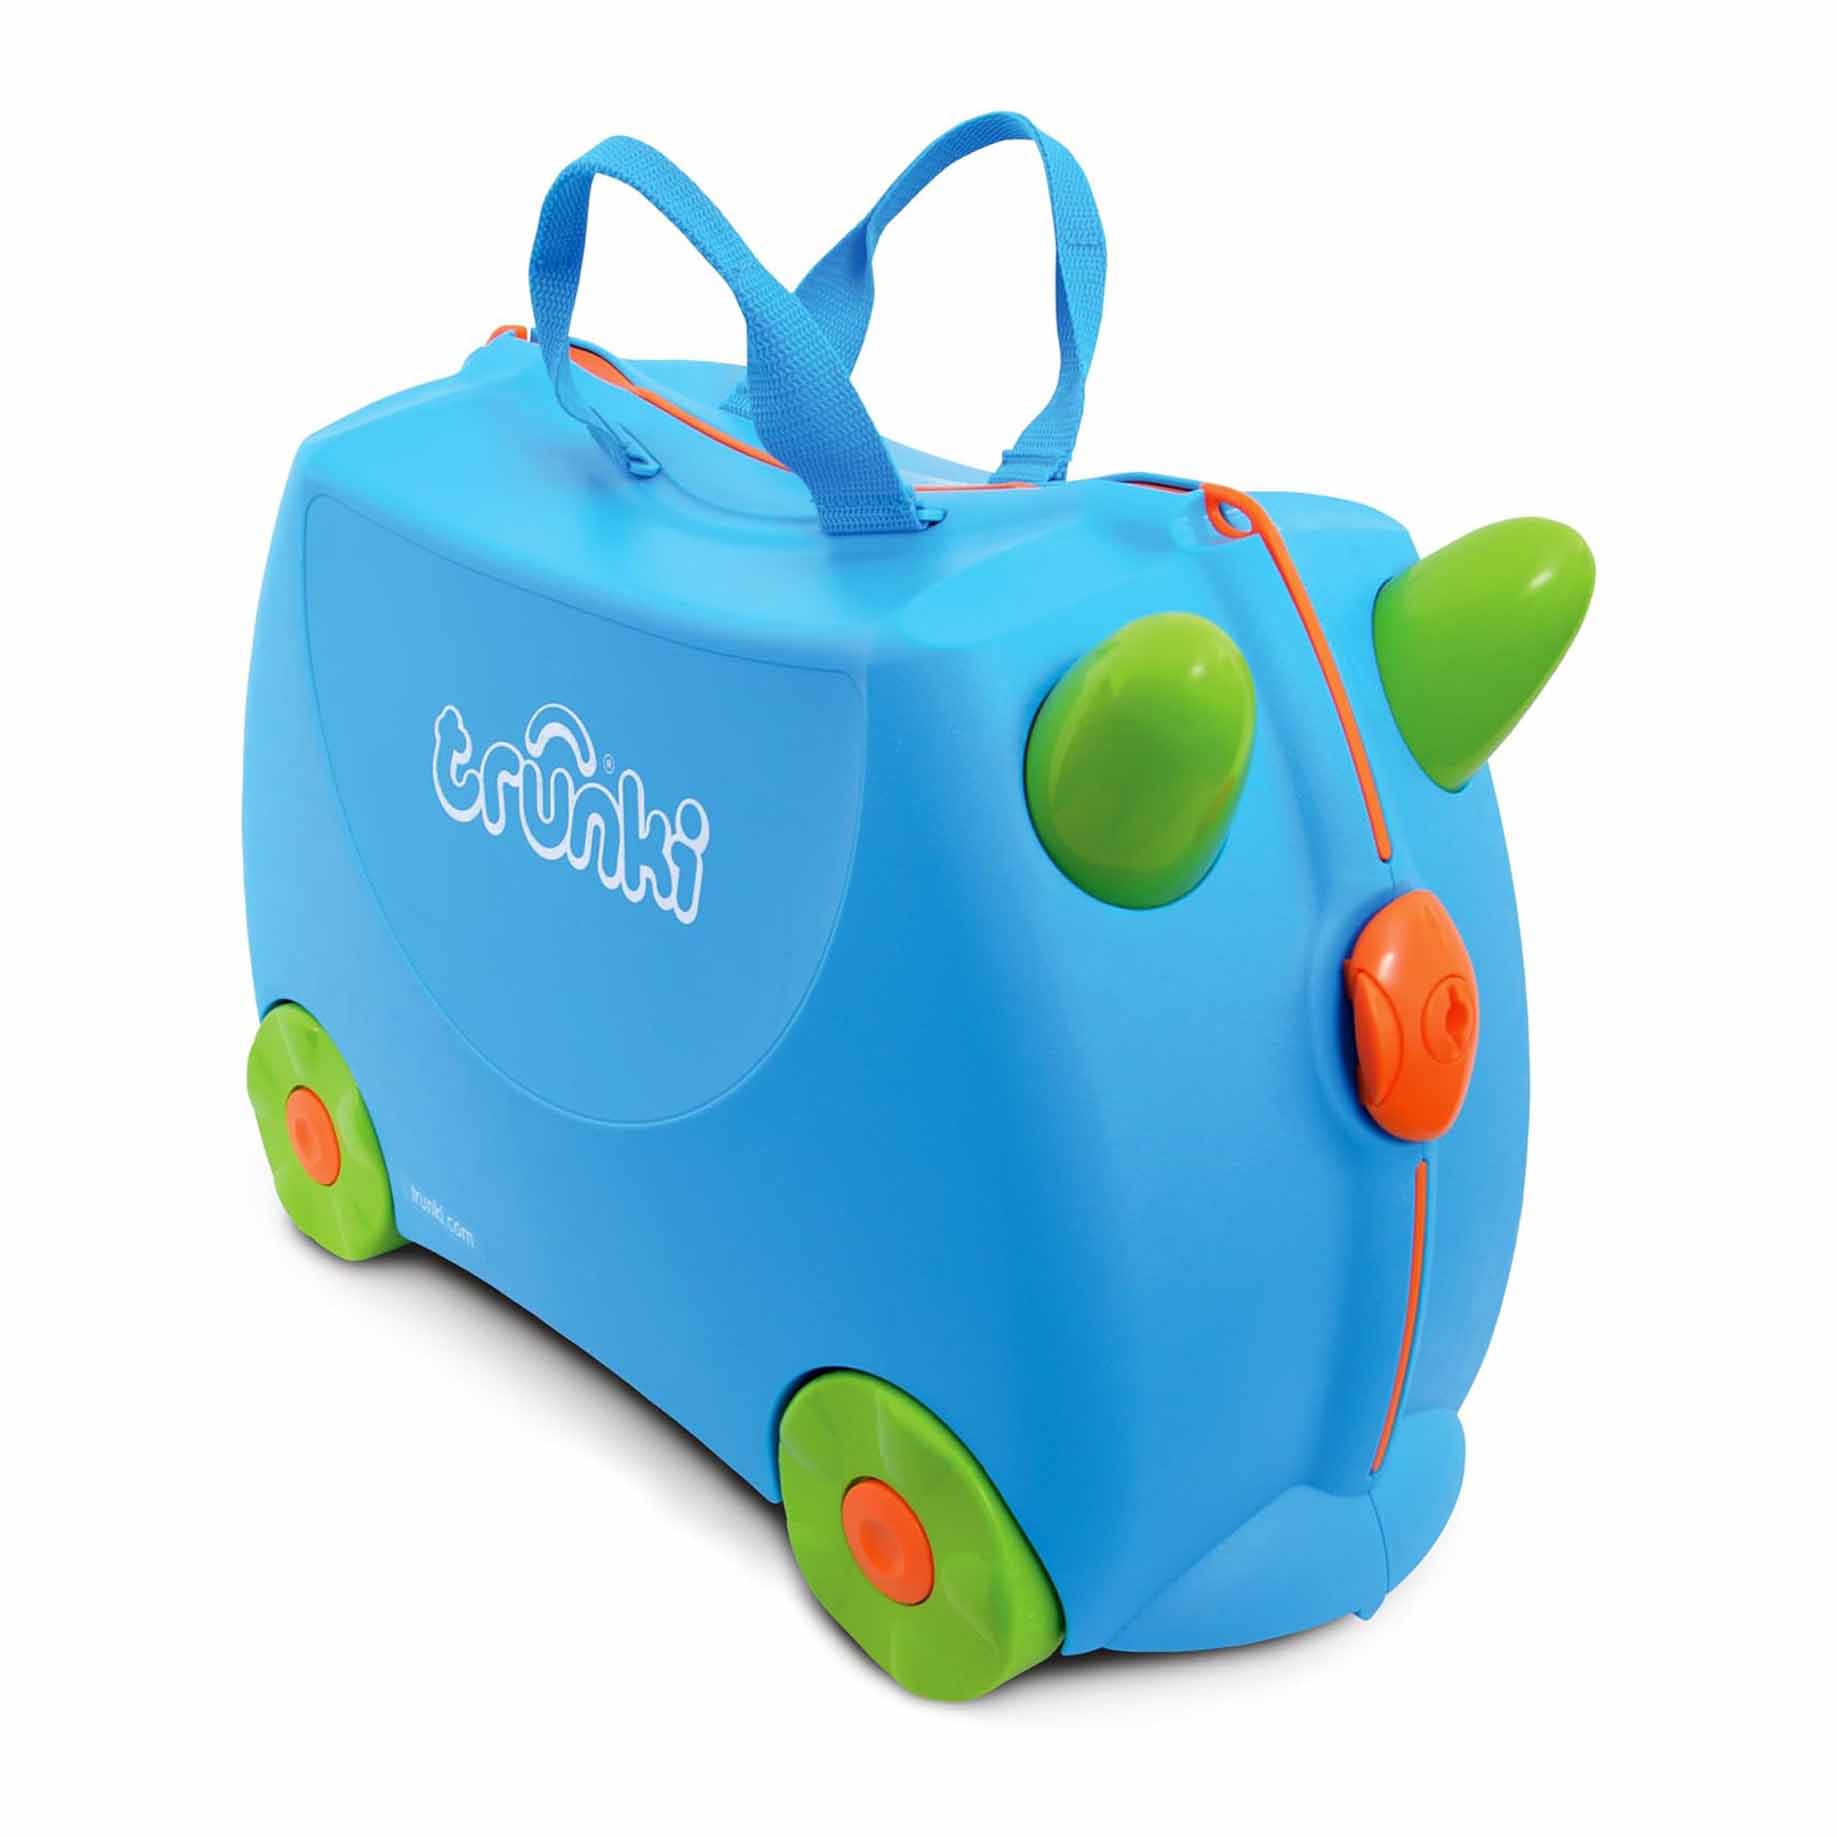 Trunki ride on suitcase in blue, green and orange with handle and comfy saddle